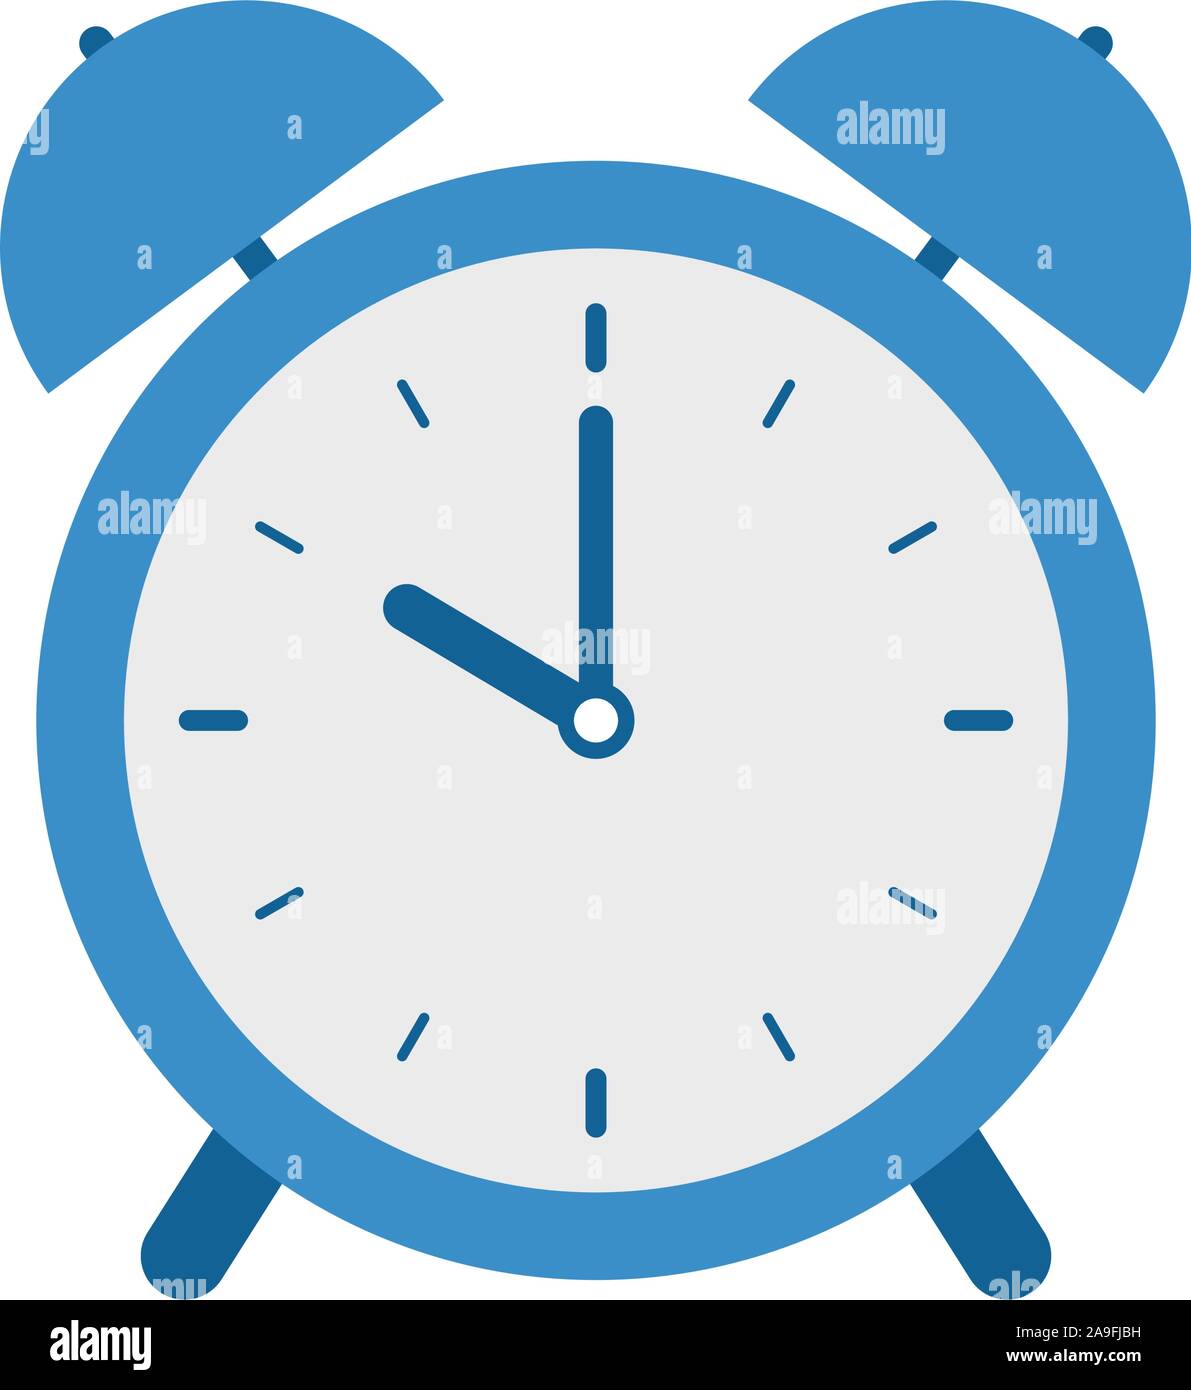 https://c8.alamy.com/comp/2A9FJBH/alarm-clock-icon-with-bells-and-hour-minute-hands-with-clock-face-alarm-timer-shows-10-clock-reminder-concept-flat-vector-illustration-2A9FJBH.jpg